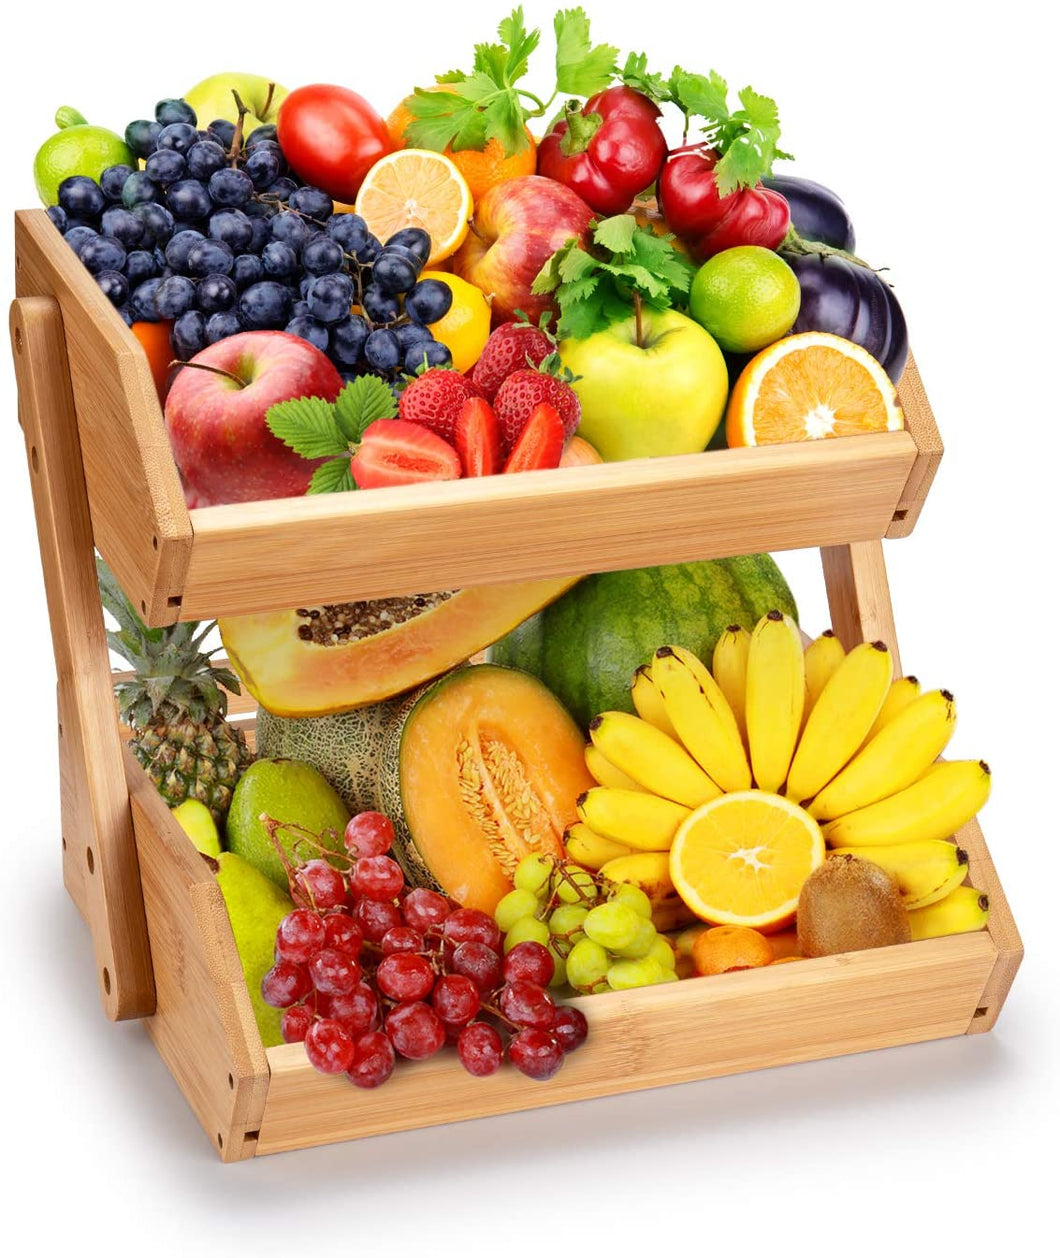 Beauty Panda Wooden 2 Layer Fruit and Vegetable Stand Basket Storage Rack (FT02S)